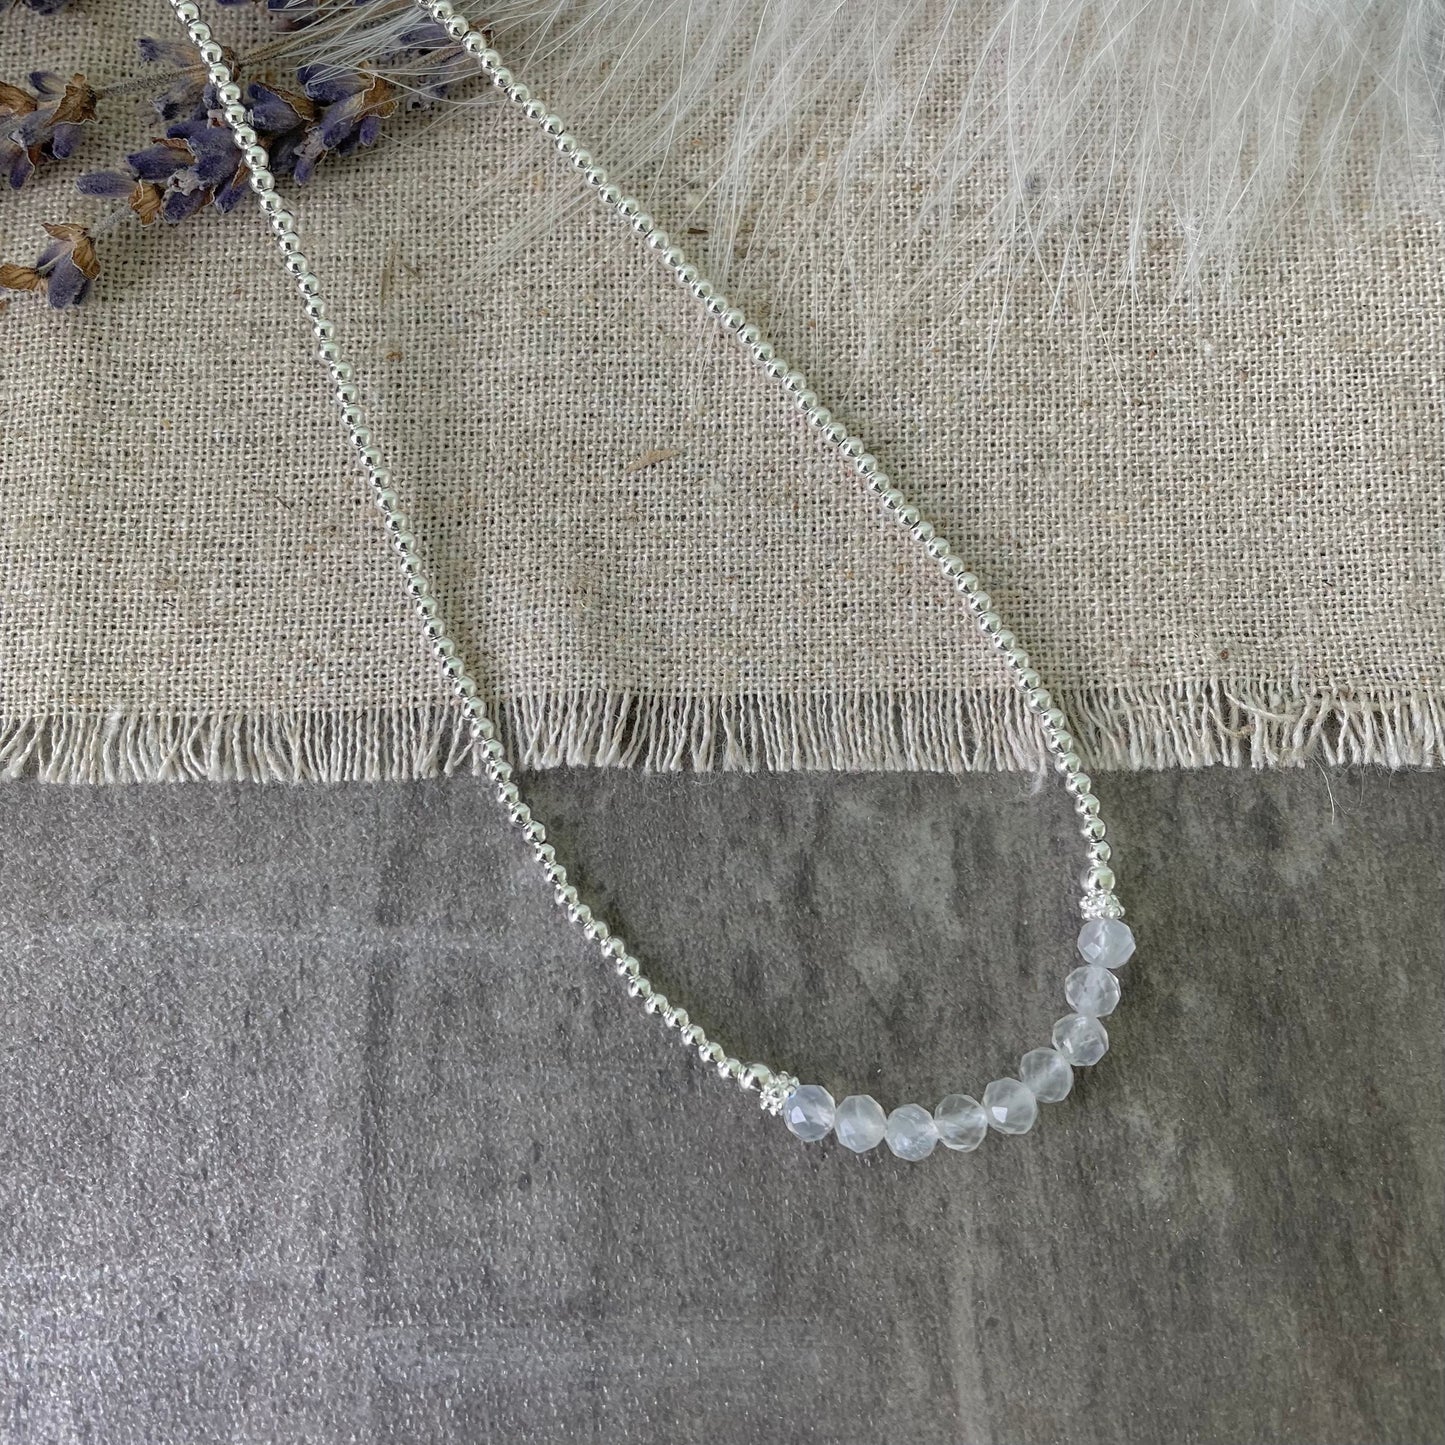 Thin Moonstone and Sterling Silver Bead Necklace, June Birthstone